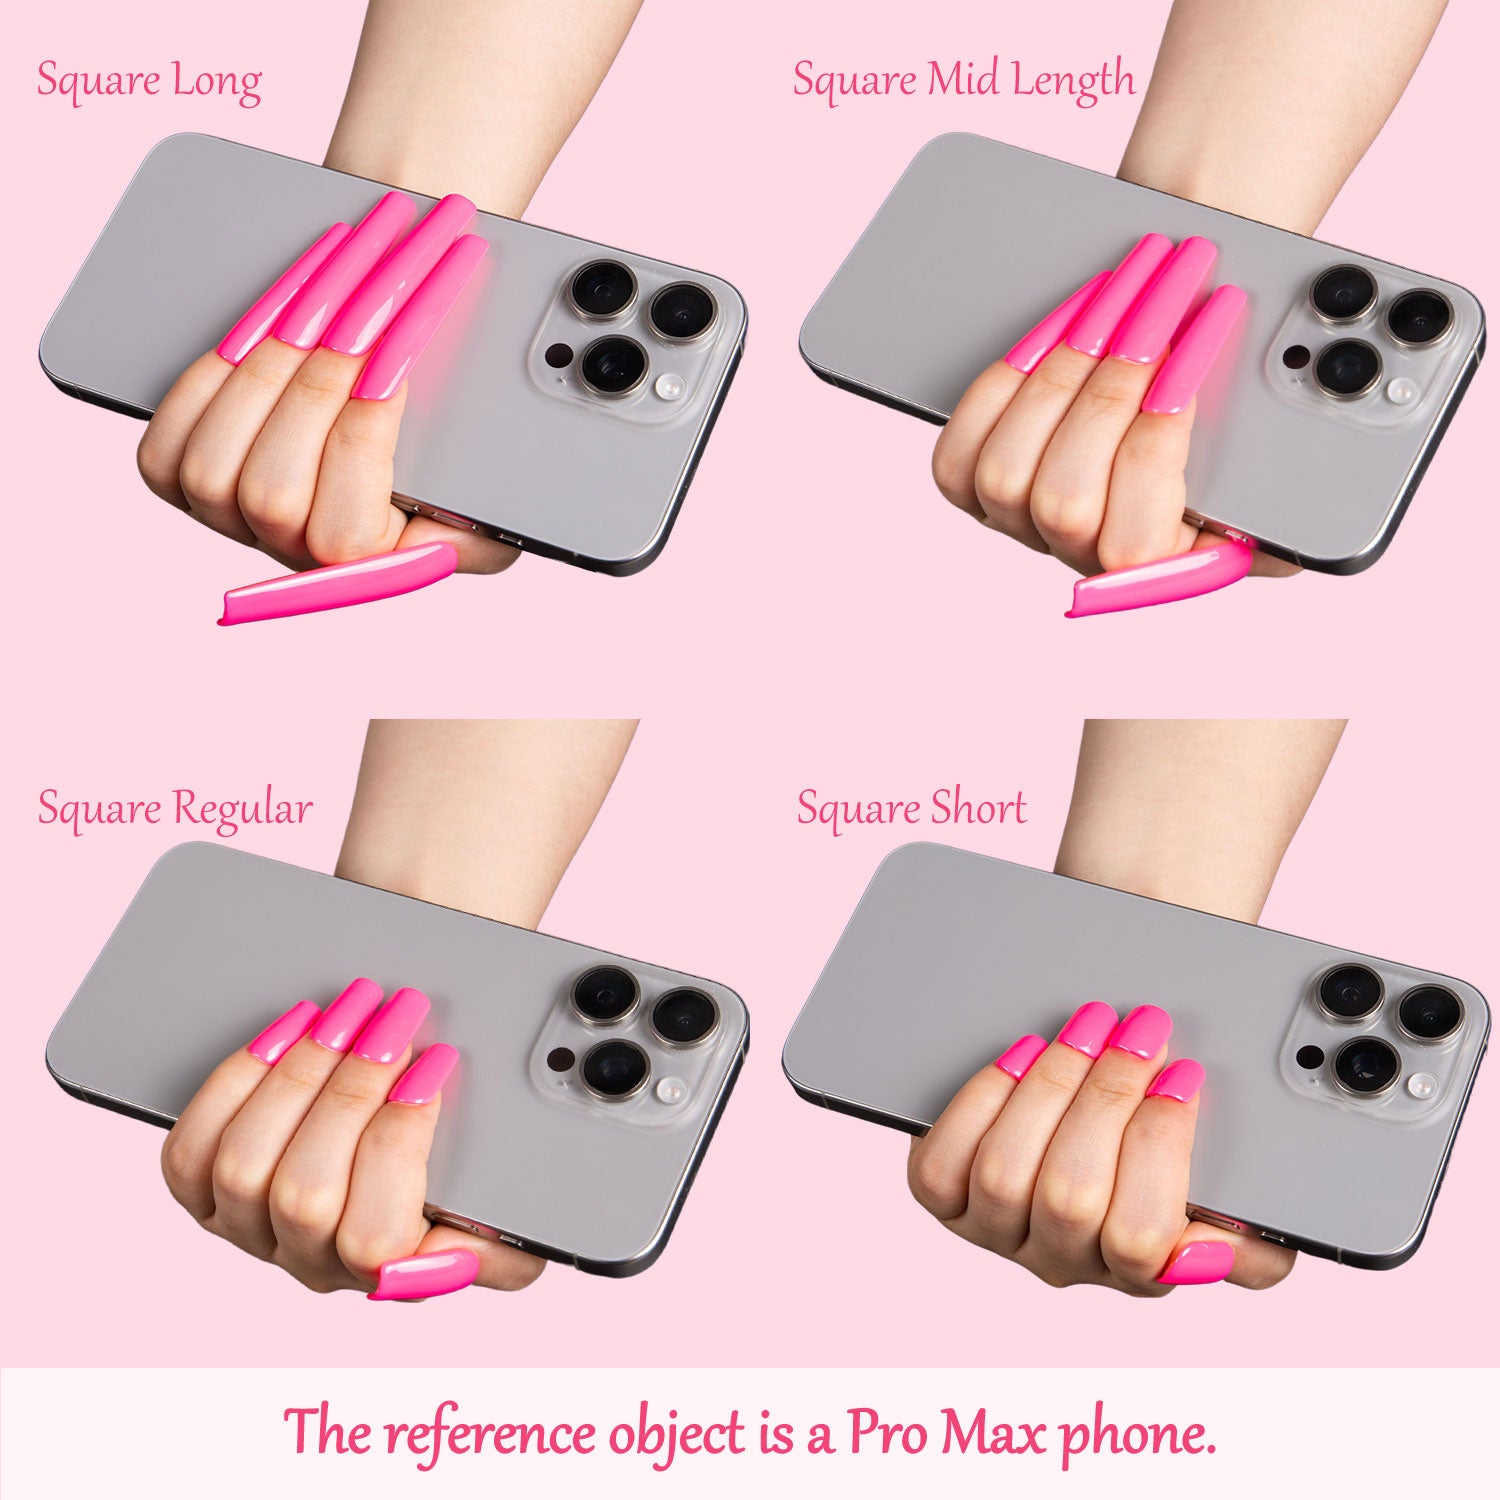 Different lengths of pink square-shaped press-on nails being held alongside a Pro Max phone, showcasing Square Long, Mid Length, Regular, and Short options.